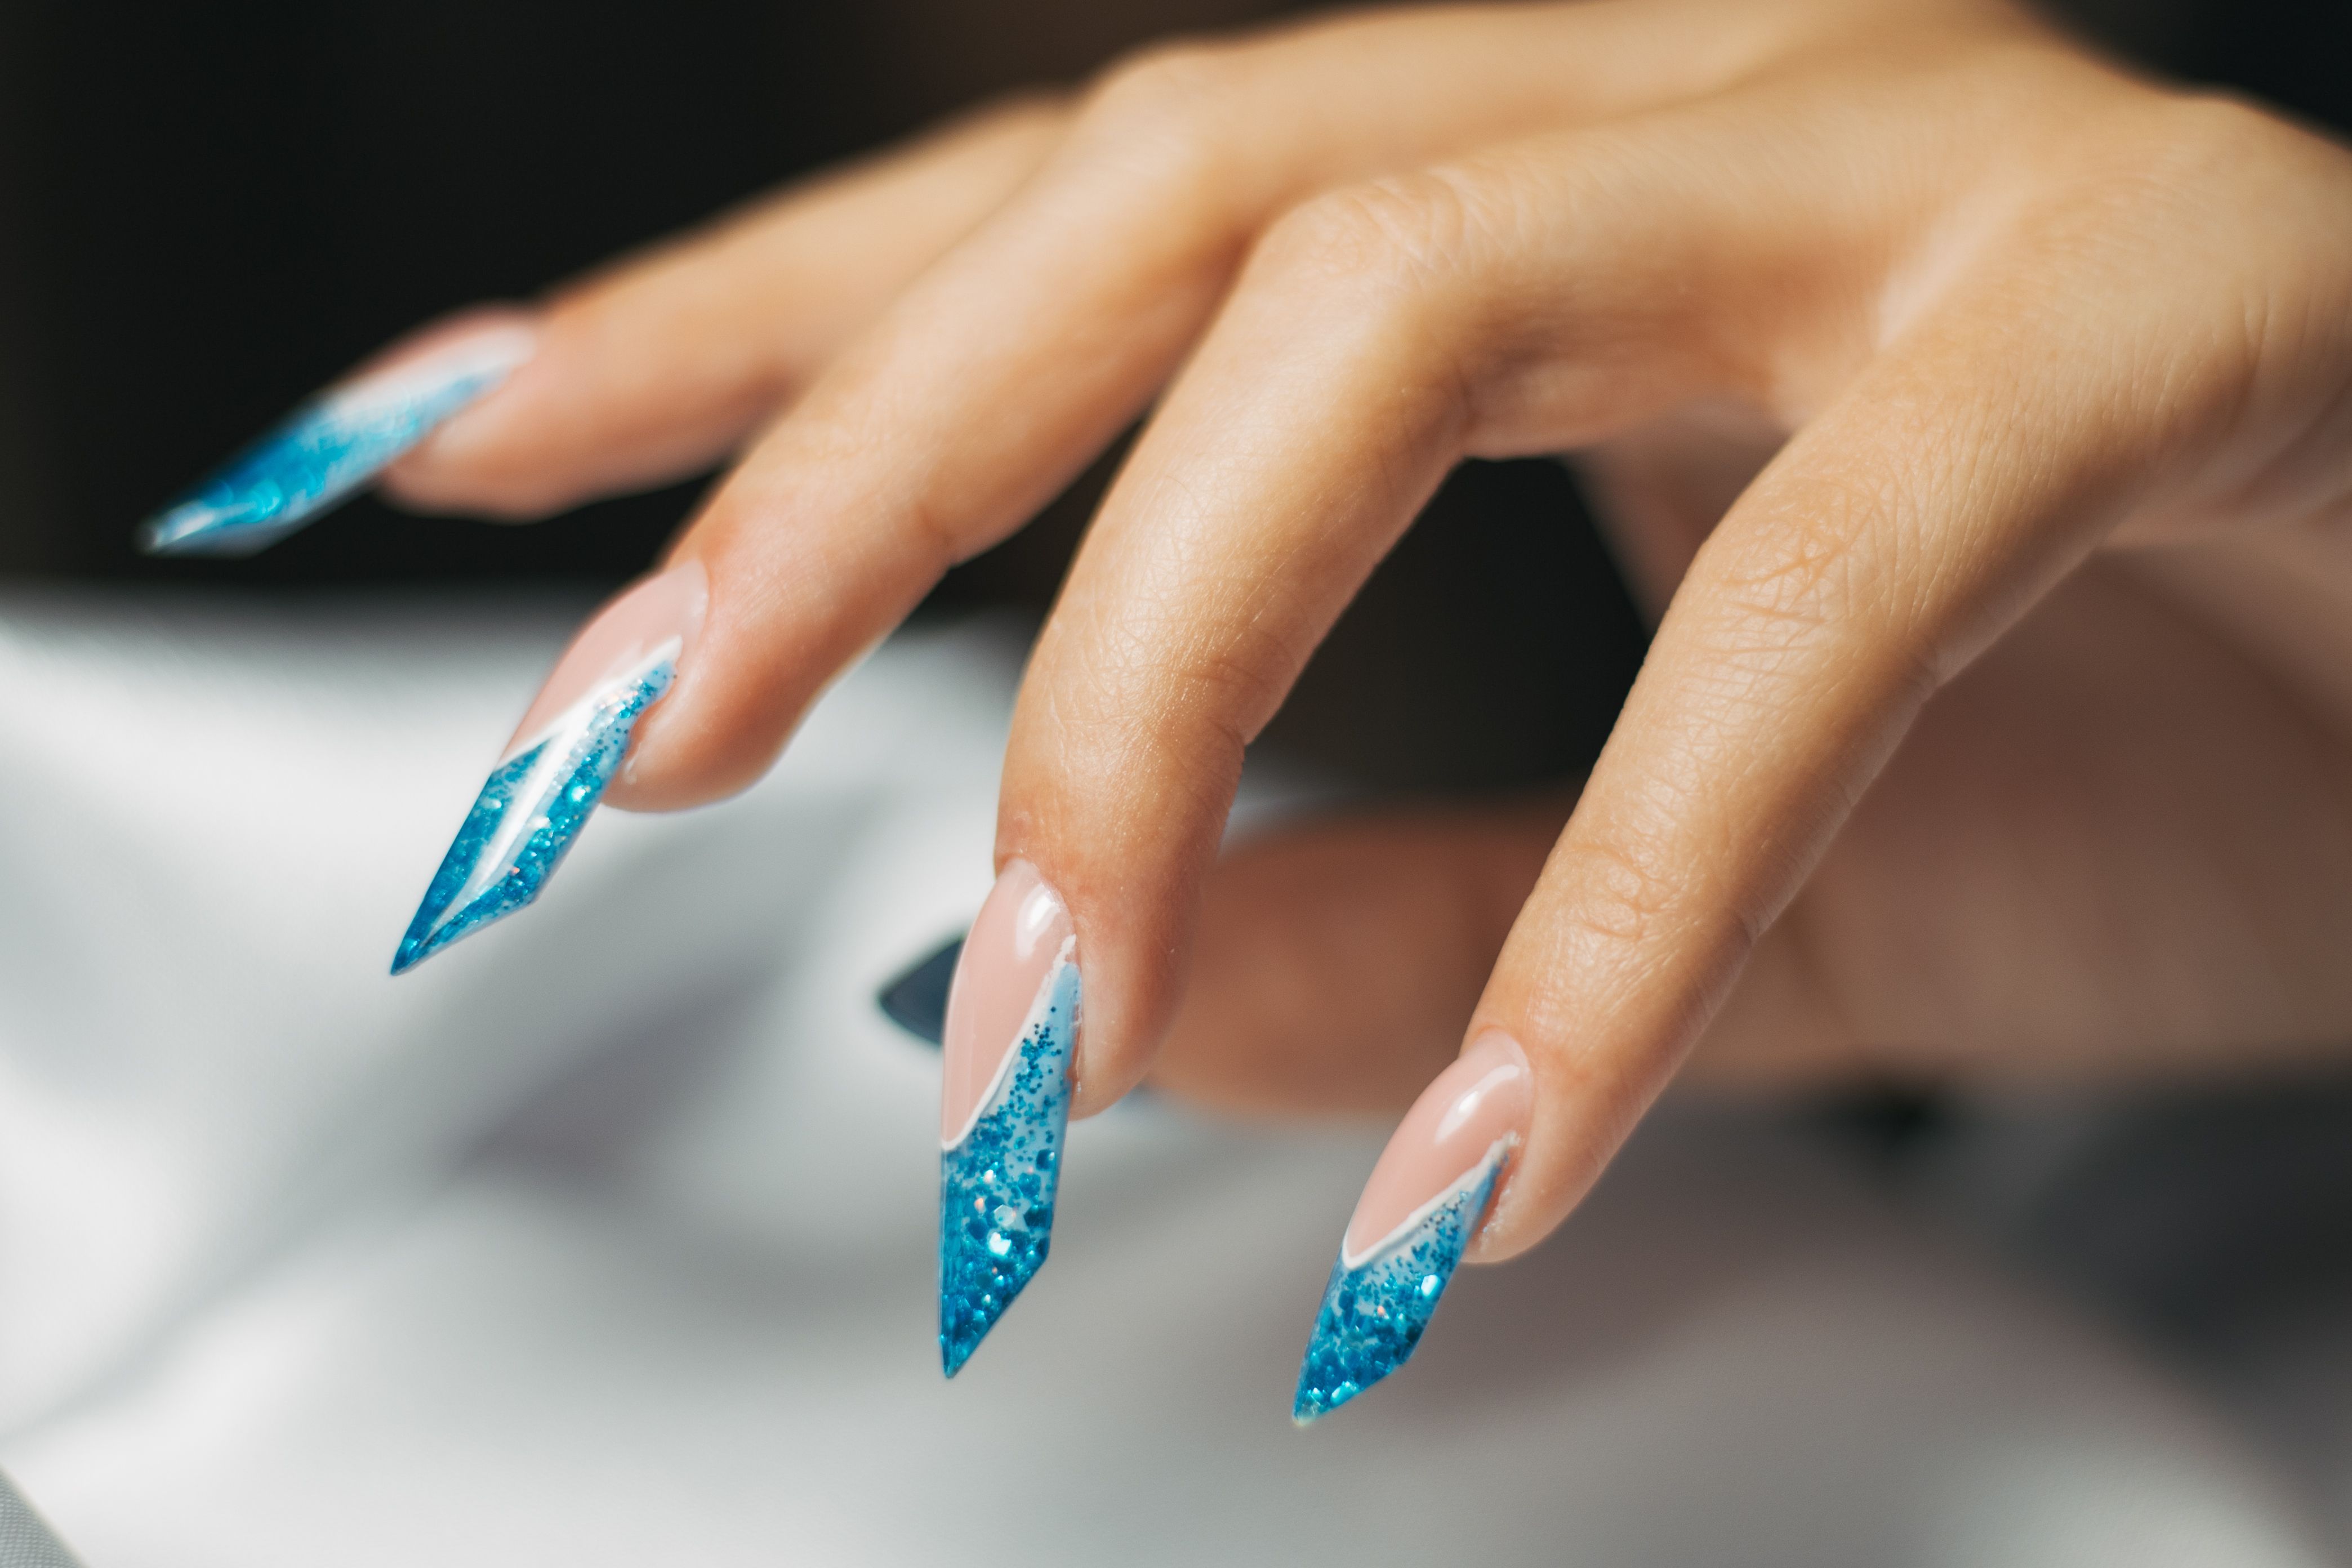 Consider This Your Ultimate Guide To Every Single Nail Shape Out There